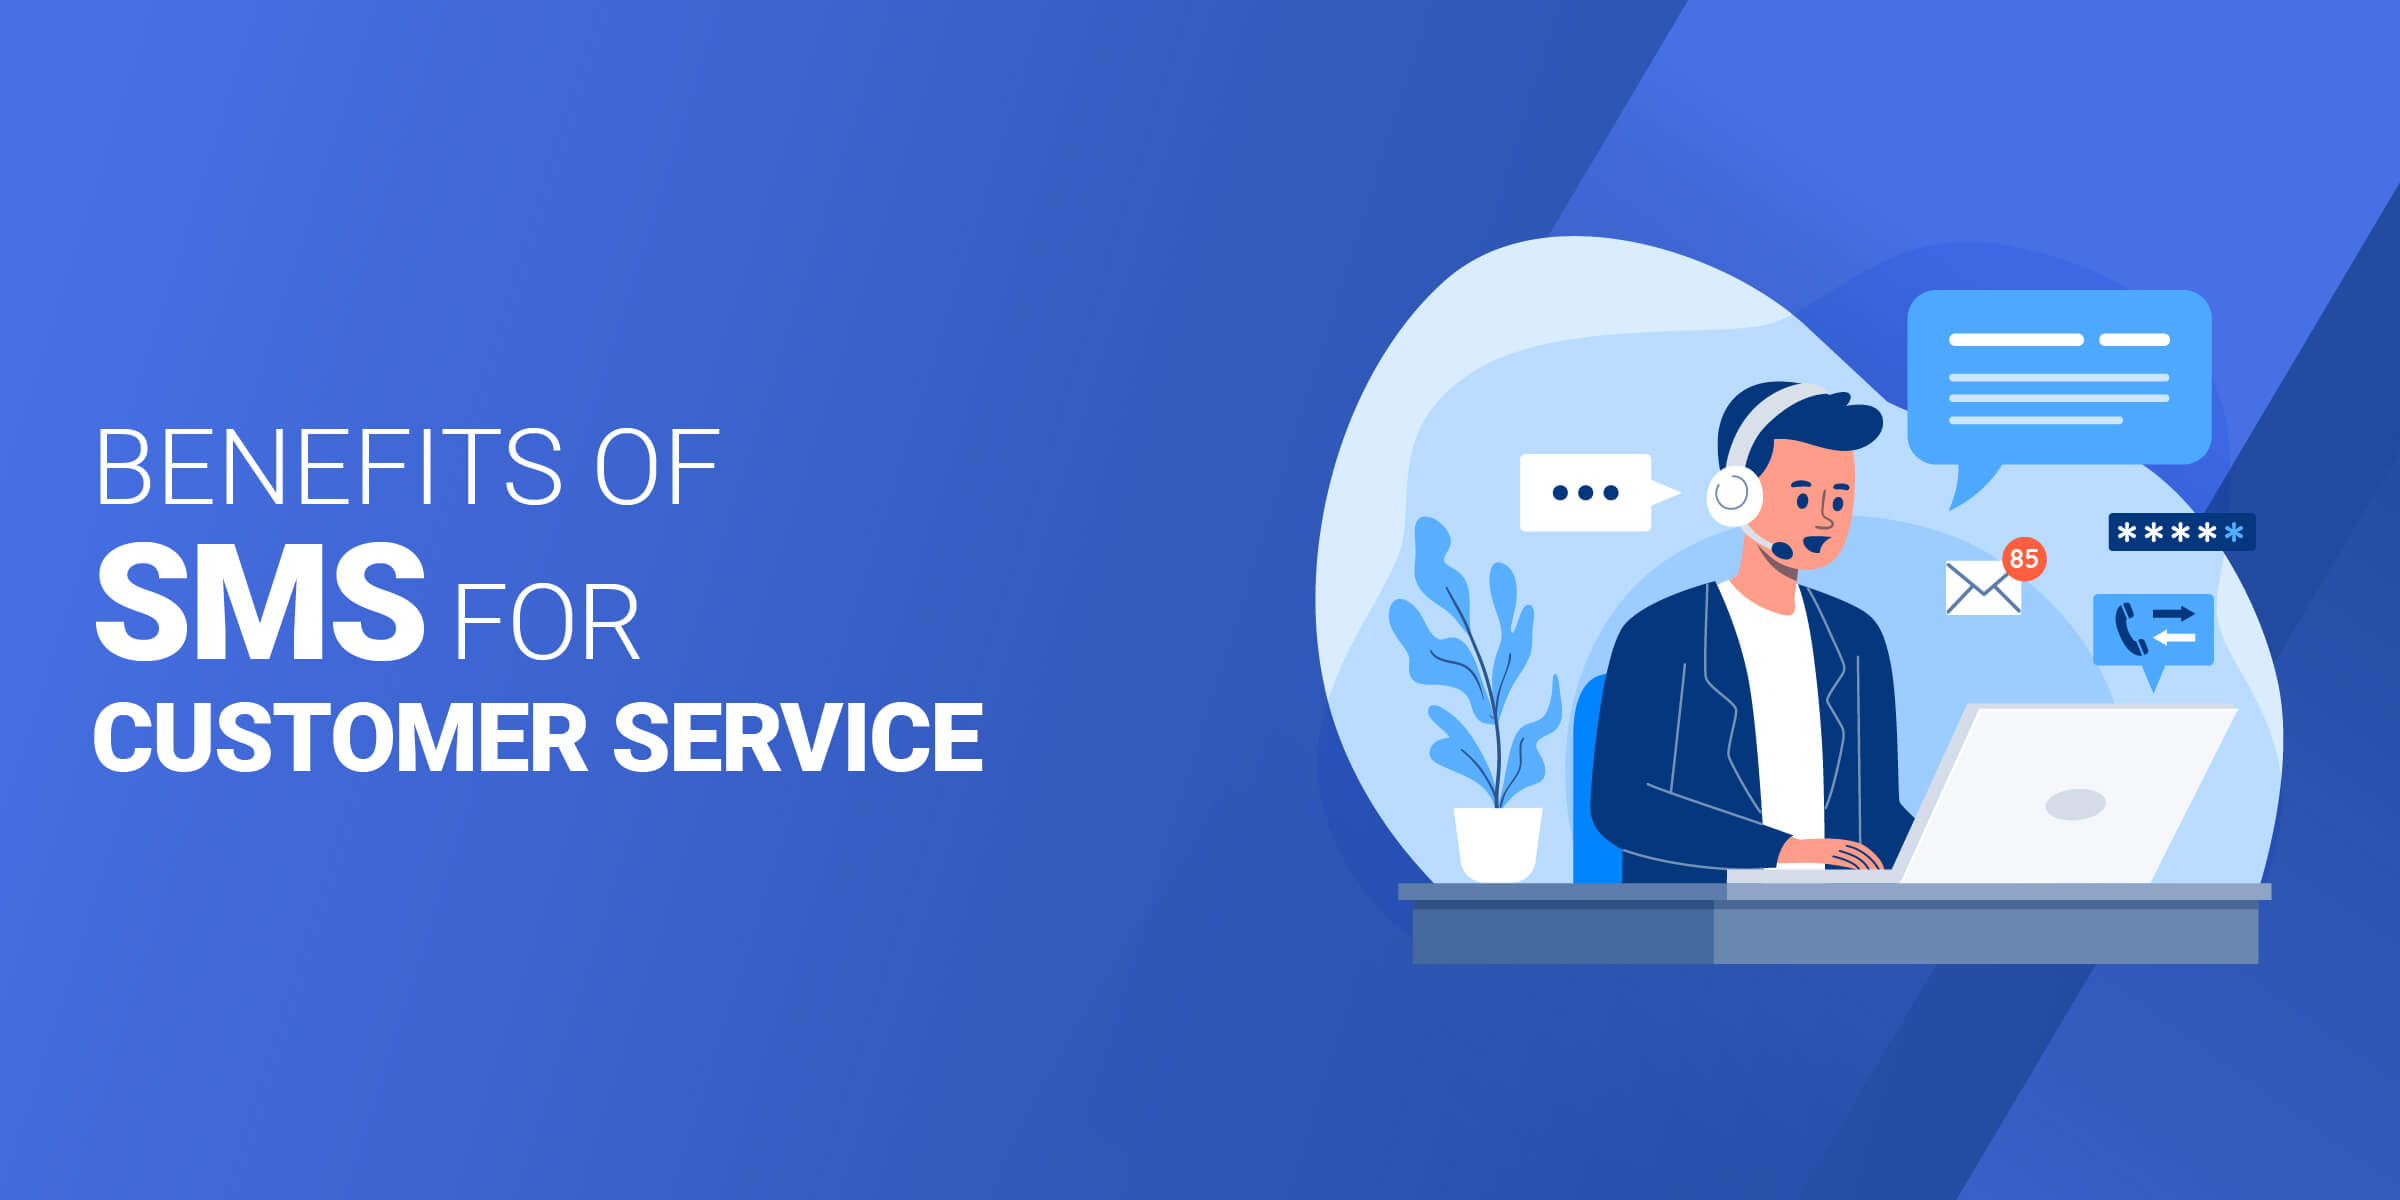 Benefits of SMS for Customer Service